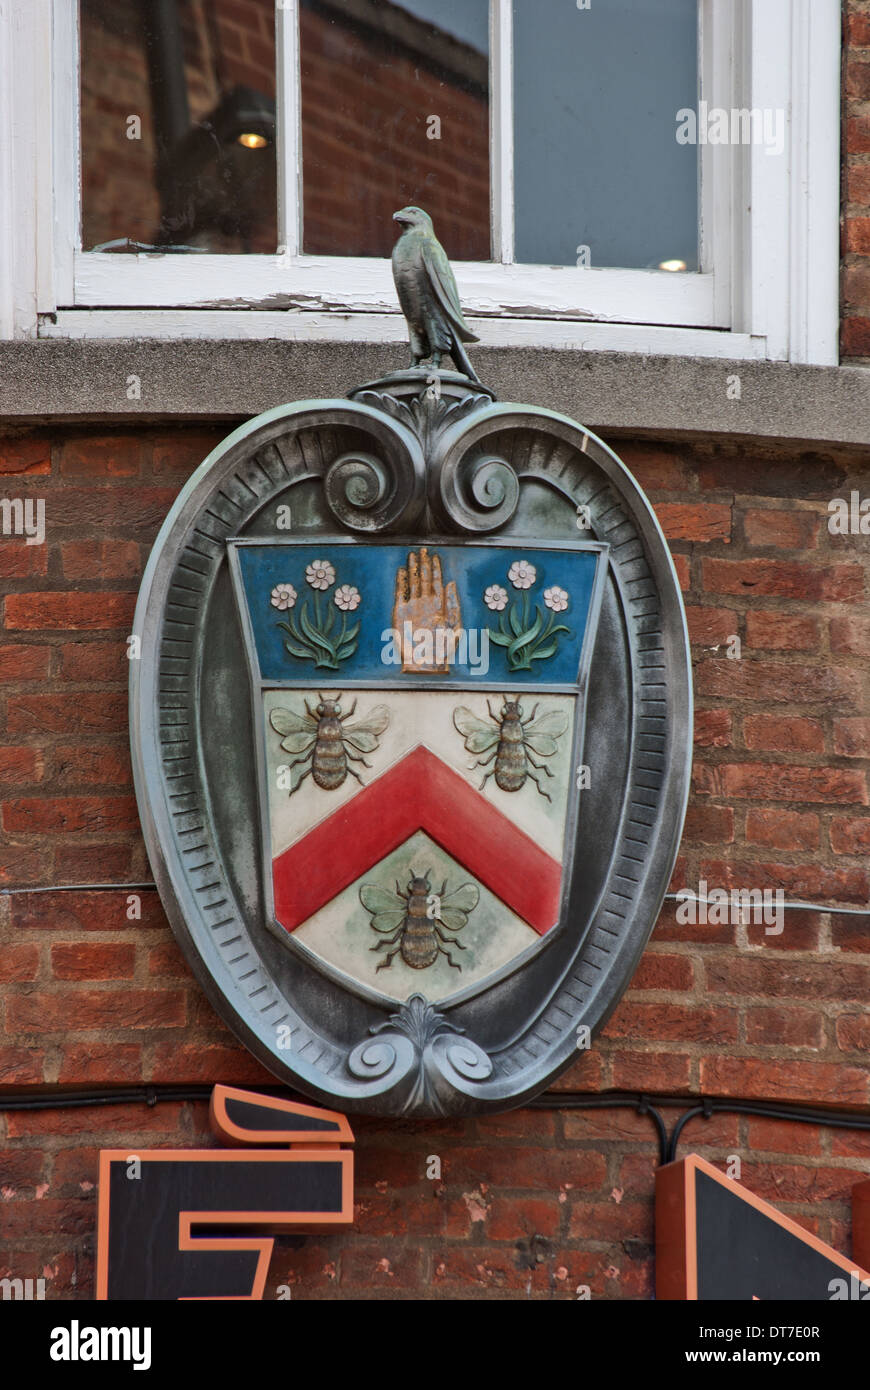 Coat of arms of the Burnley Building Society above Cafe Nero in York Stock Photo